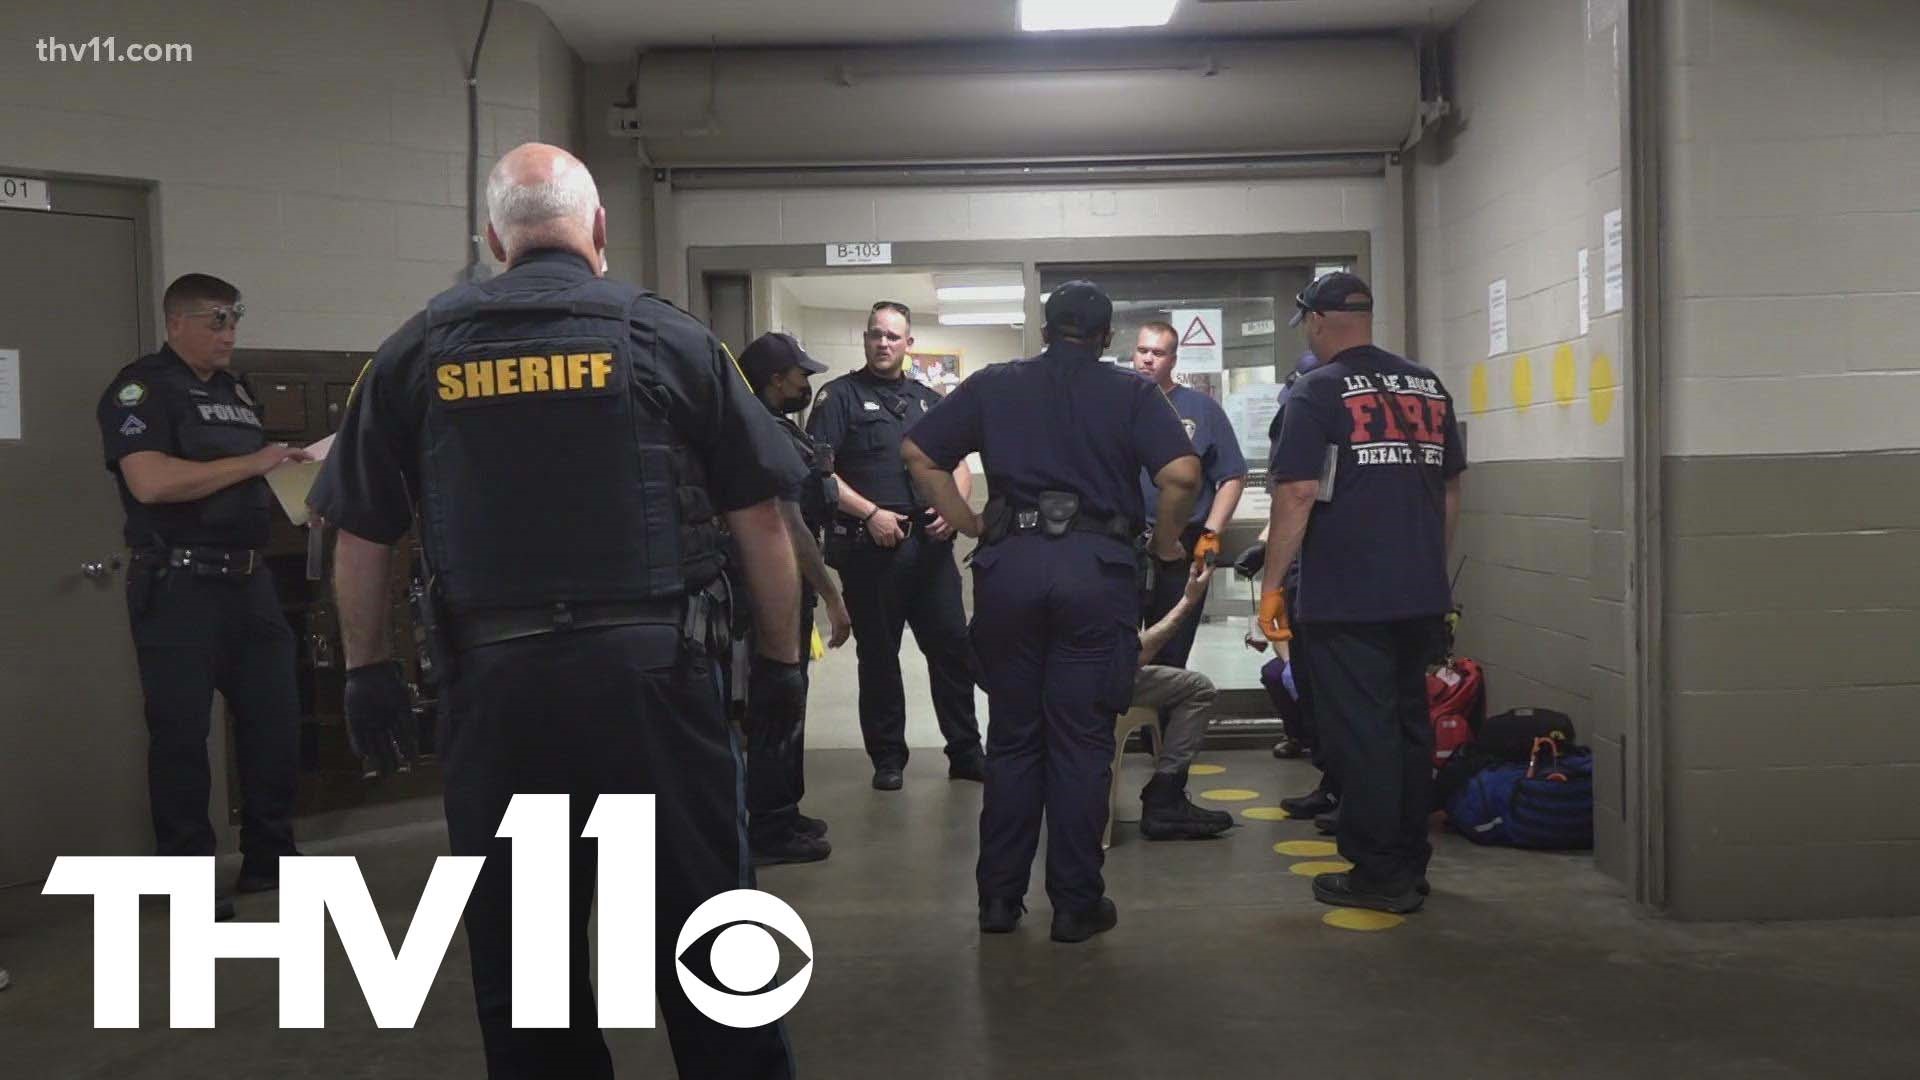 Dozens of people are arrested and booked into jail each day in Arkansas, with detention centers focused on making sure that remains safe even before inmates arrive.